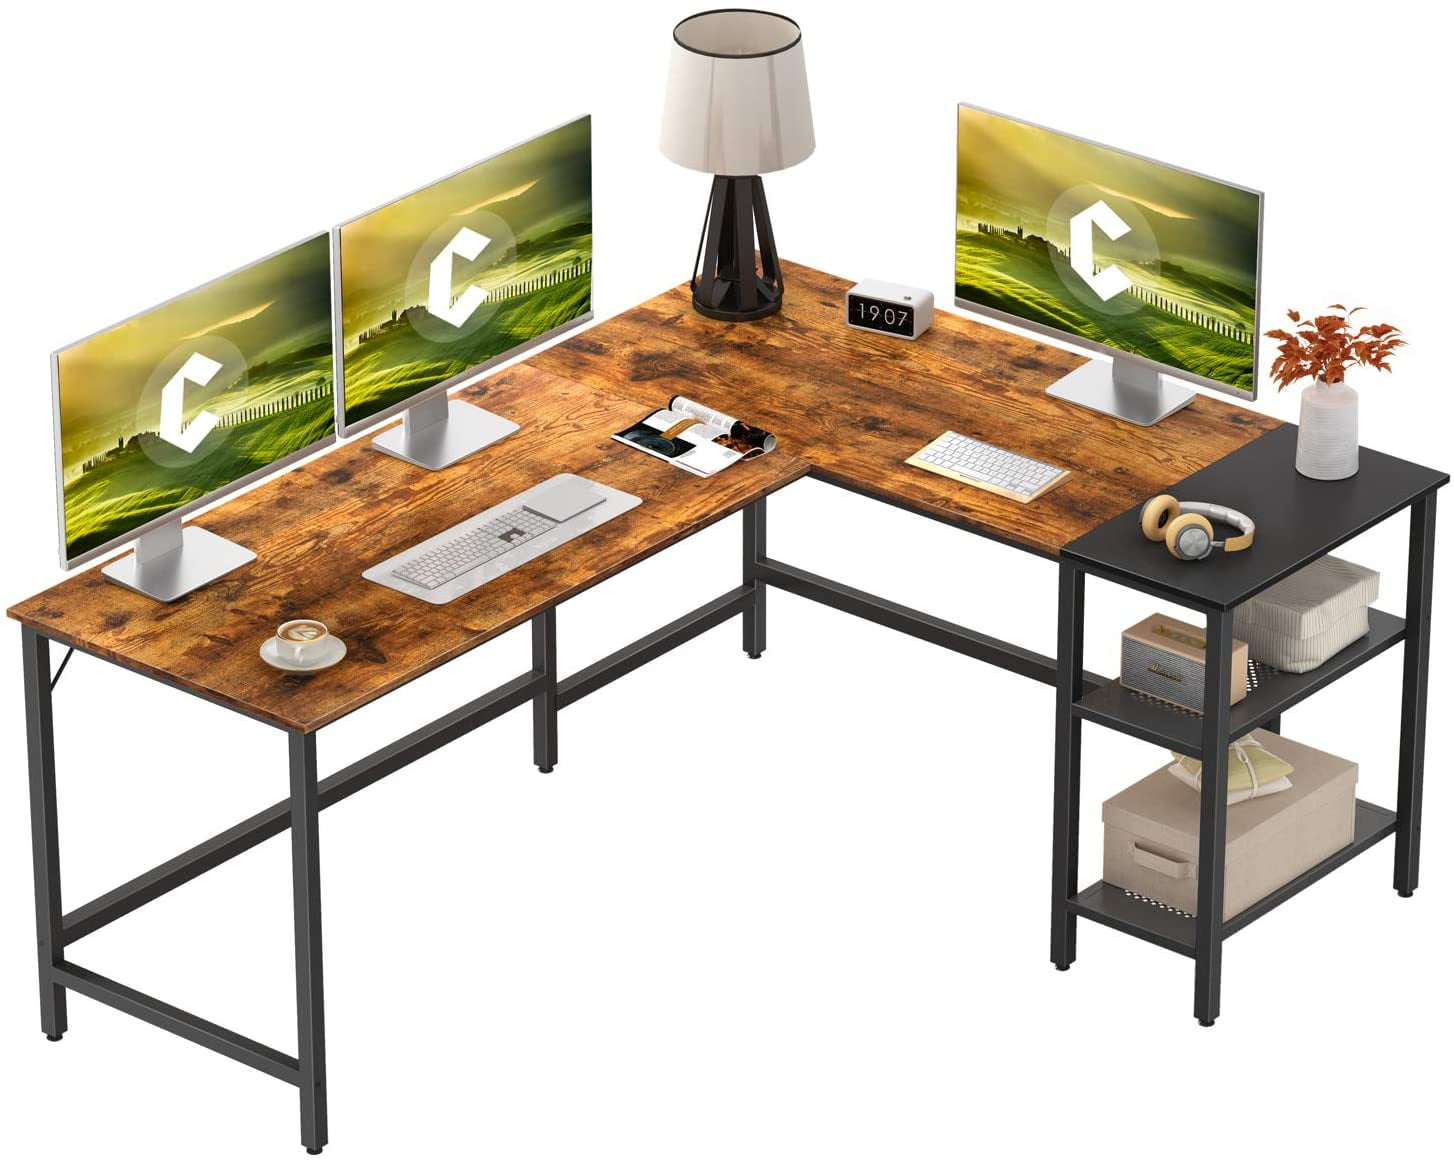 sogesfurniture Computer Desk 63 inches Large Size Office Desk Gaming Desk Computer Table with BIFMA Certification Sturdy Office Desk Writing Desk,Brown BHCA-AC3FB-160